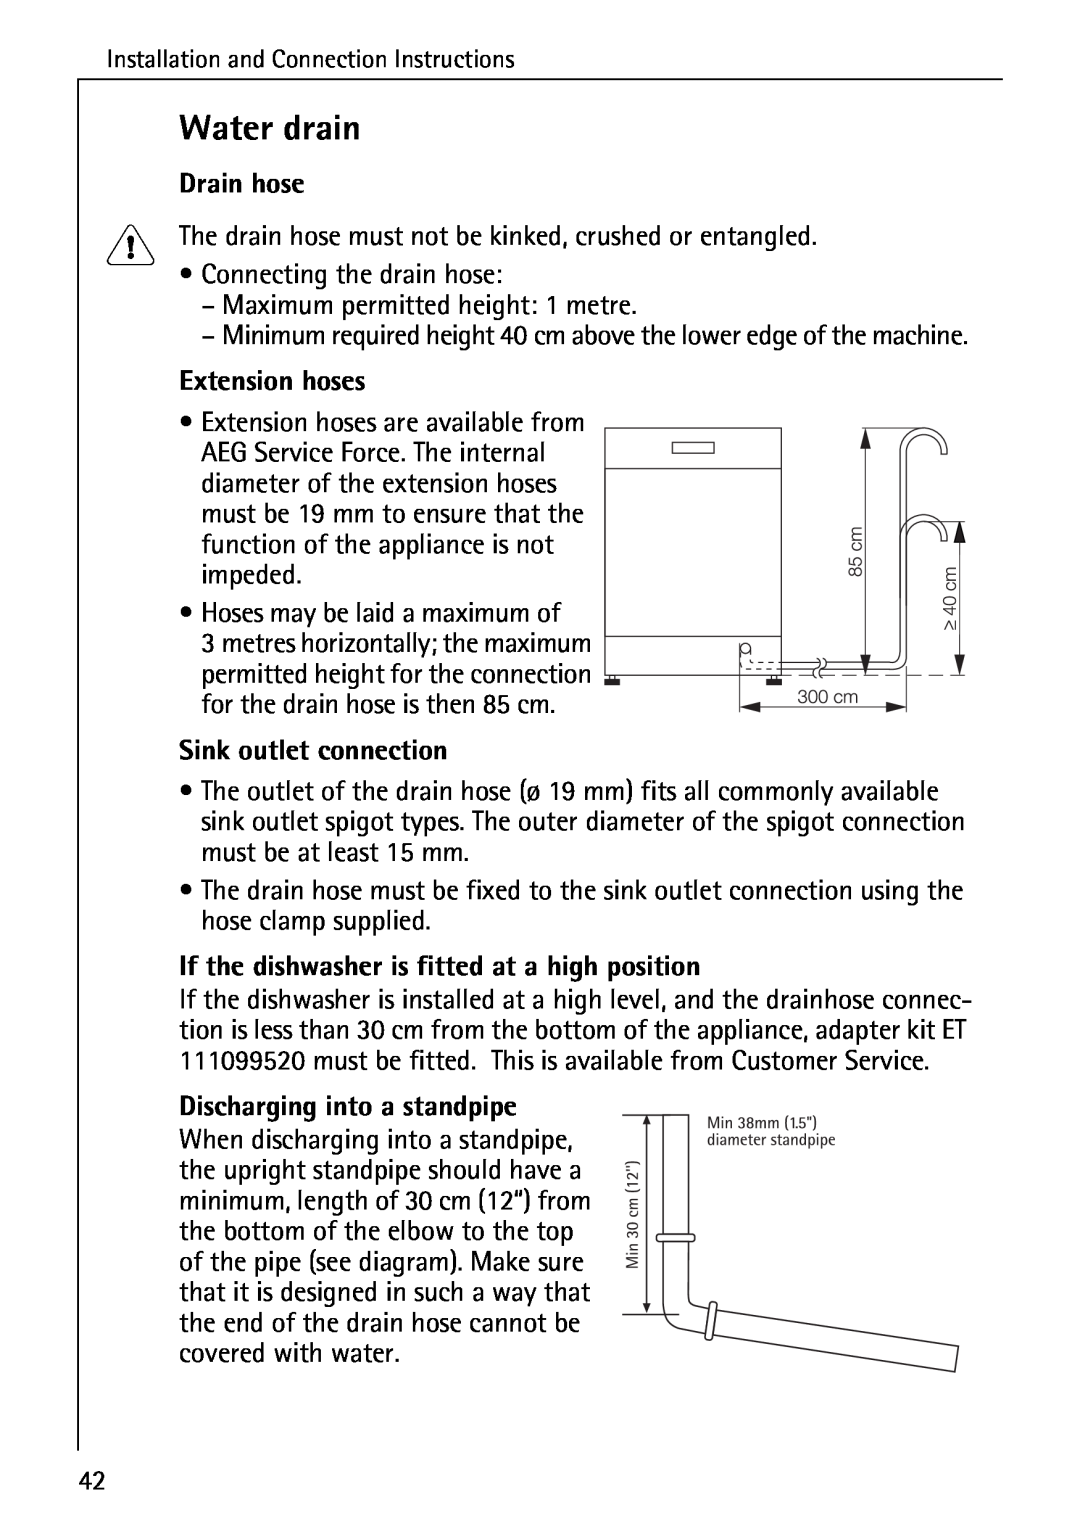 Electrolux 85050 VI manual Water drain, Drain hose, Extension hoses, Sink outlet connection, Discharging into a standpipe 